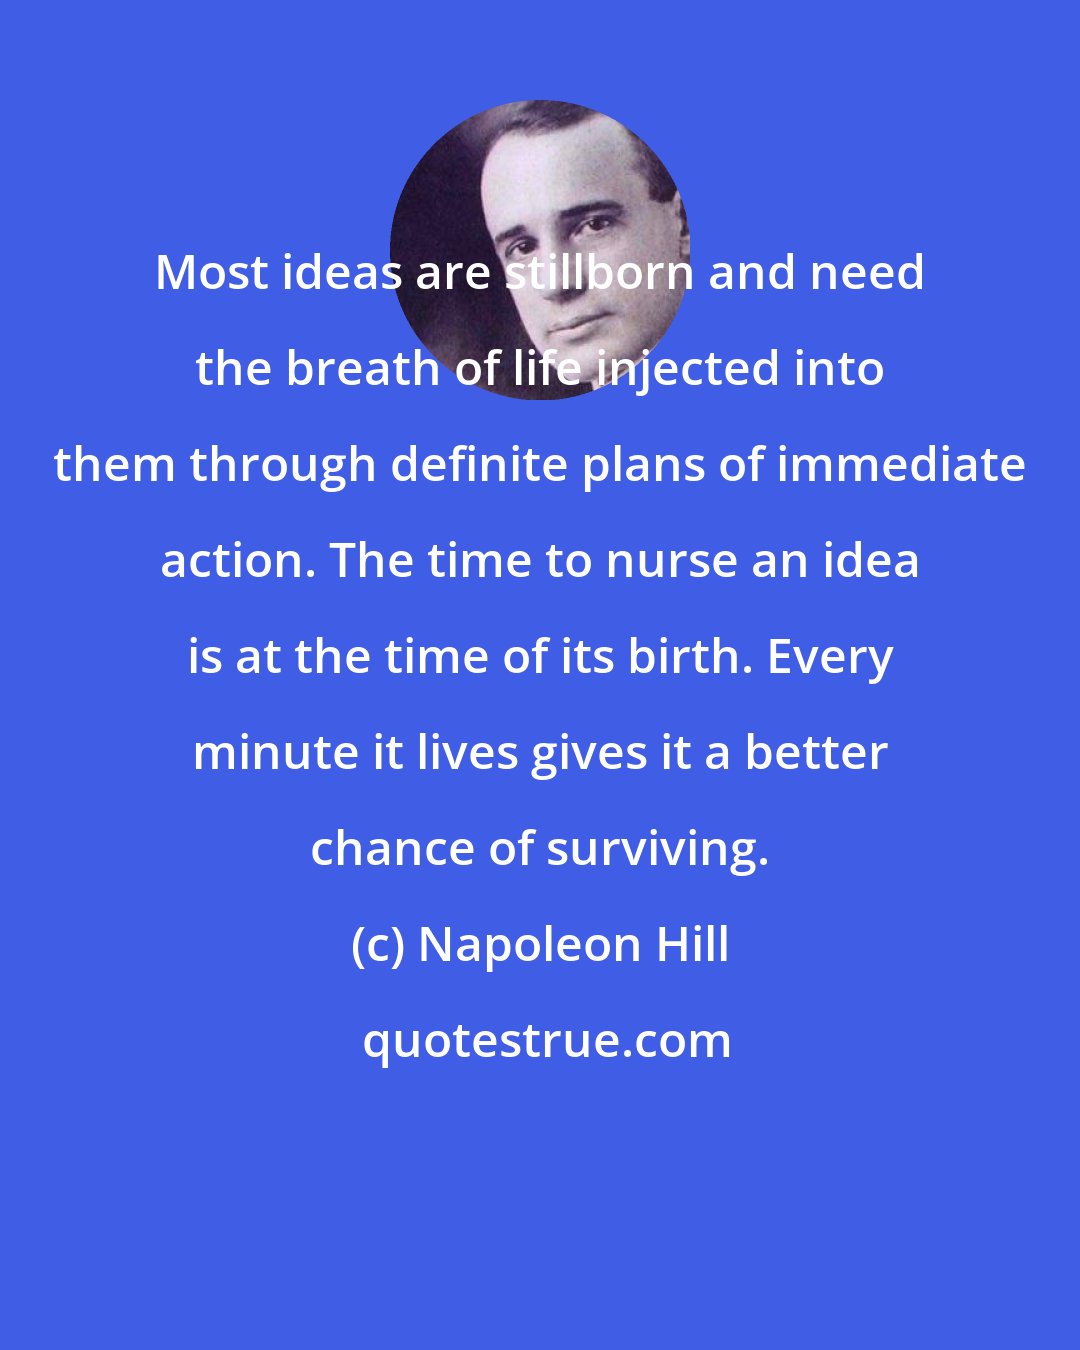 Napoleon Hill: Most ideas are stillborn and need the breath of life injected into them through definite plans of immediate action. The time to nurse an idea is at the time of its birth. Every minute it lives gives it a better chance of surviving.